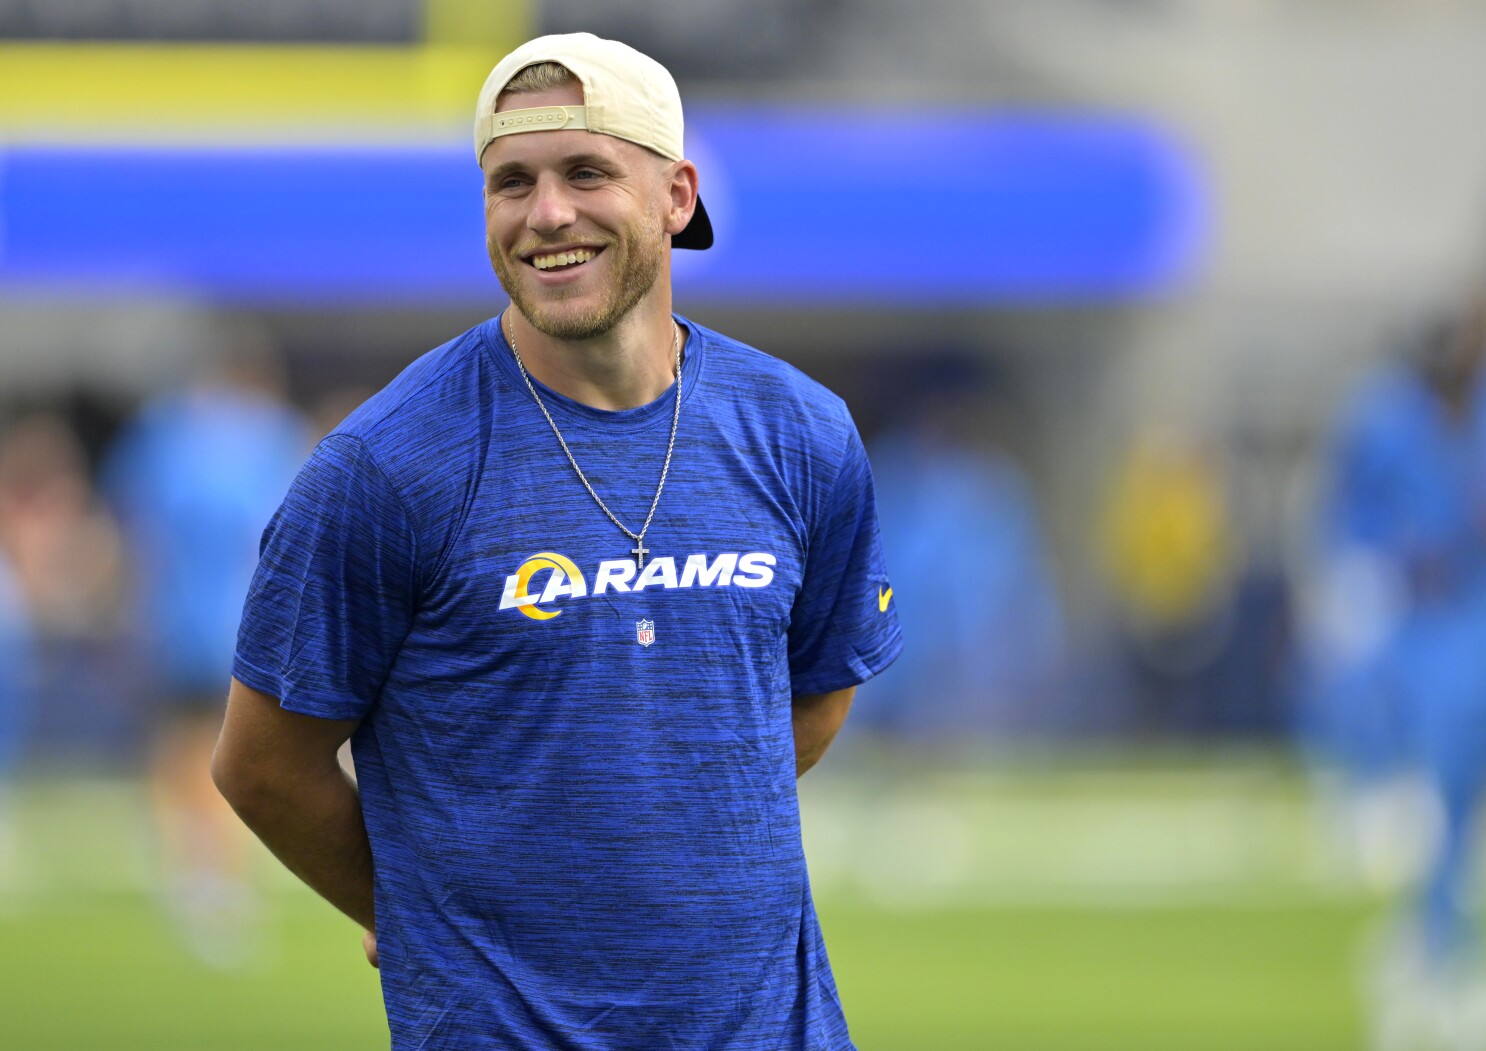 How tall is Cooper Kupp?